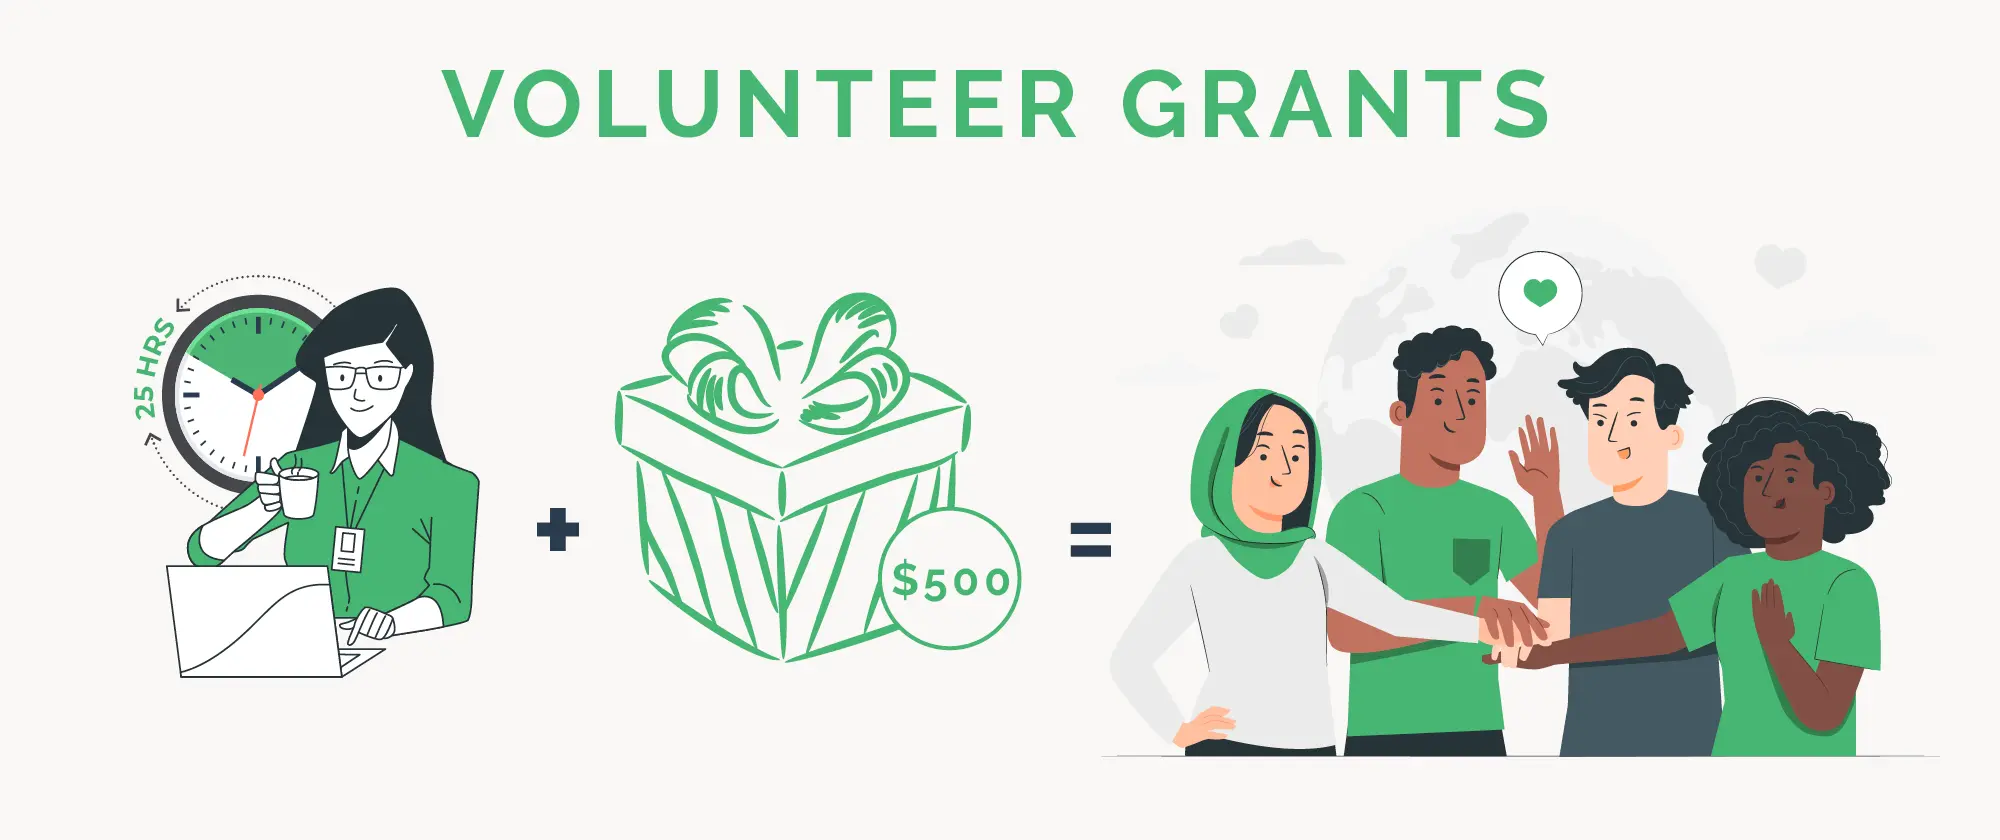 Volunteer grants are a corporate giving program in which a company donates to nonprofits where employees volunteer.